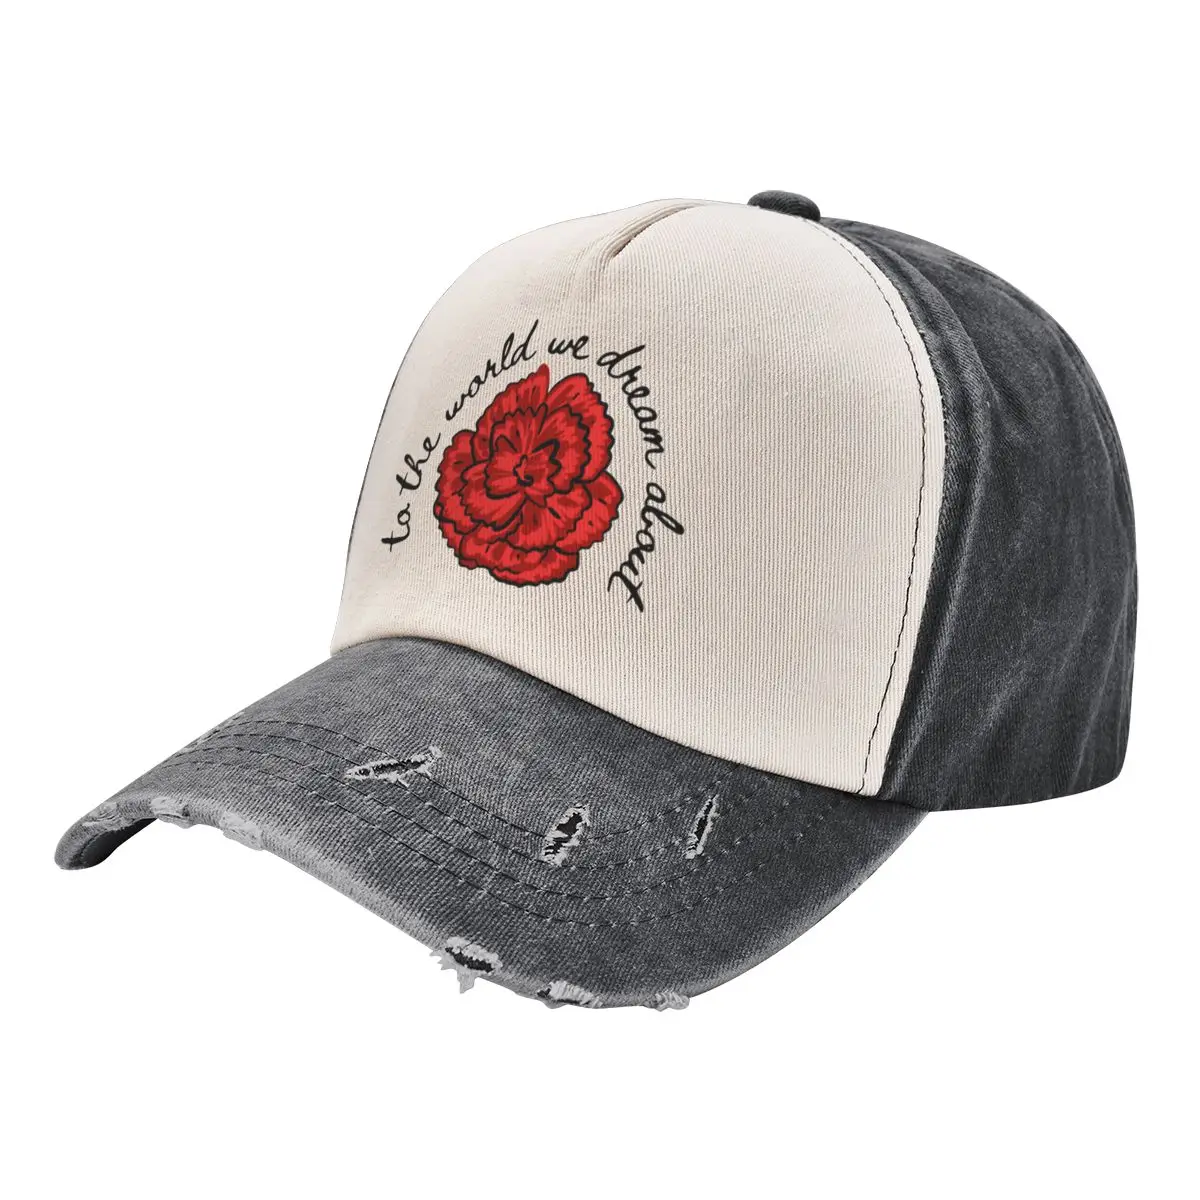 

To the World We Dream About Hadestown Baseball Cap Golf Vintage Sunscreen Luxury Woman Men's